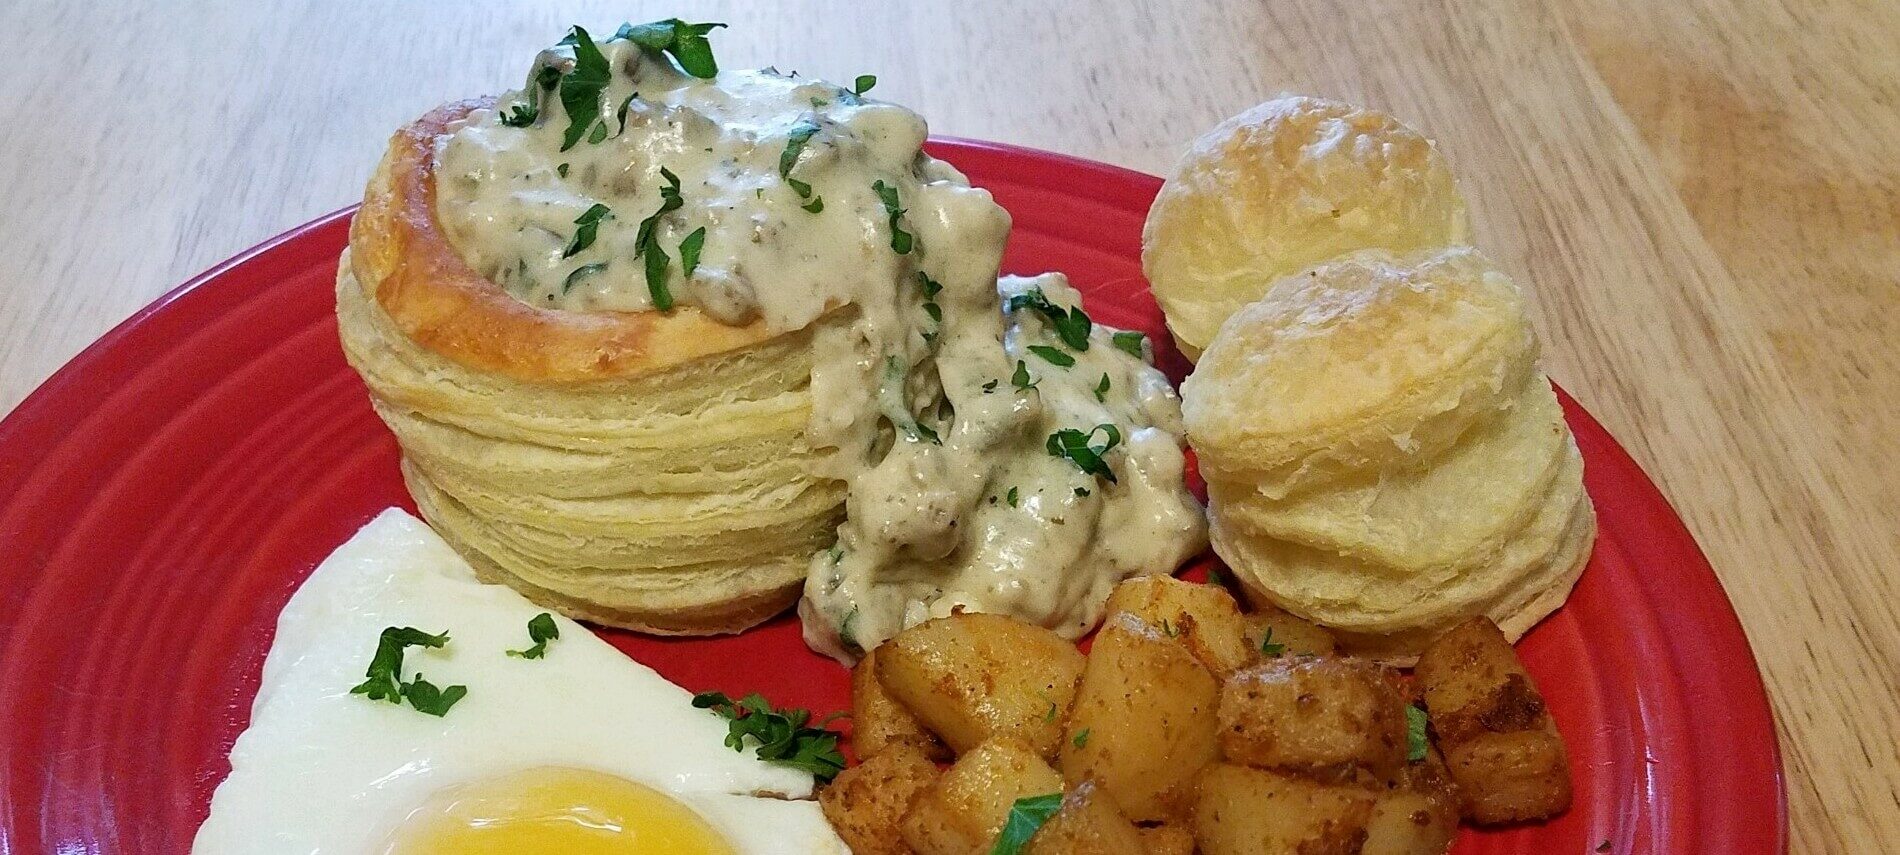 red plate with a golden-brown puff pastry bowl filled with a sausage and mushroom gravy with seasoned diced potatoes and sunny side up egg